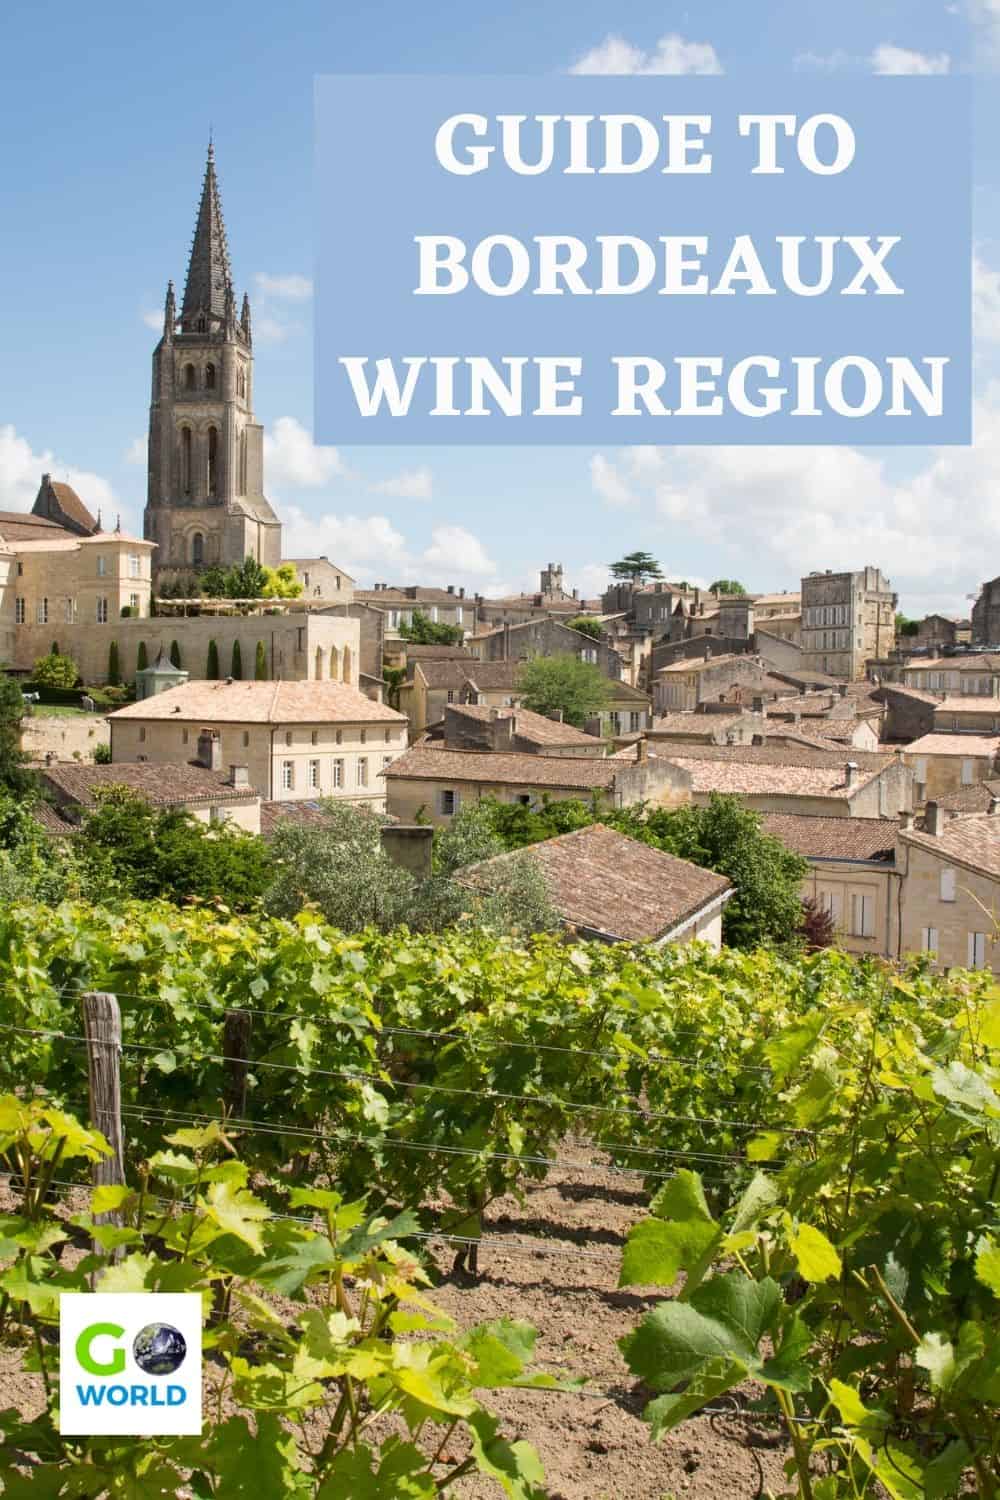 Visiting cellars and chateaus, tasting wine in stunning surroundings and learning about wine are just some of the things to do in Bordeaux. #France #Bordeauxwineregion